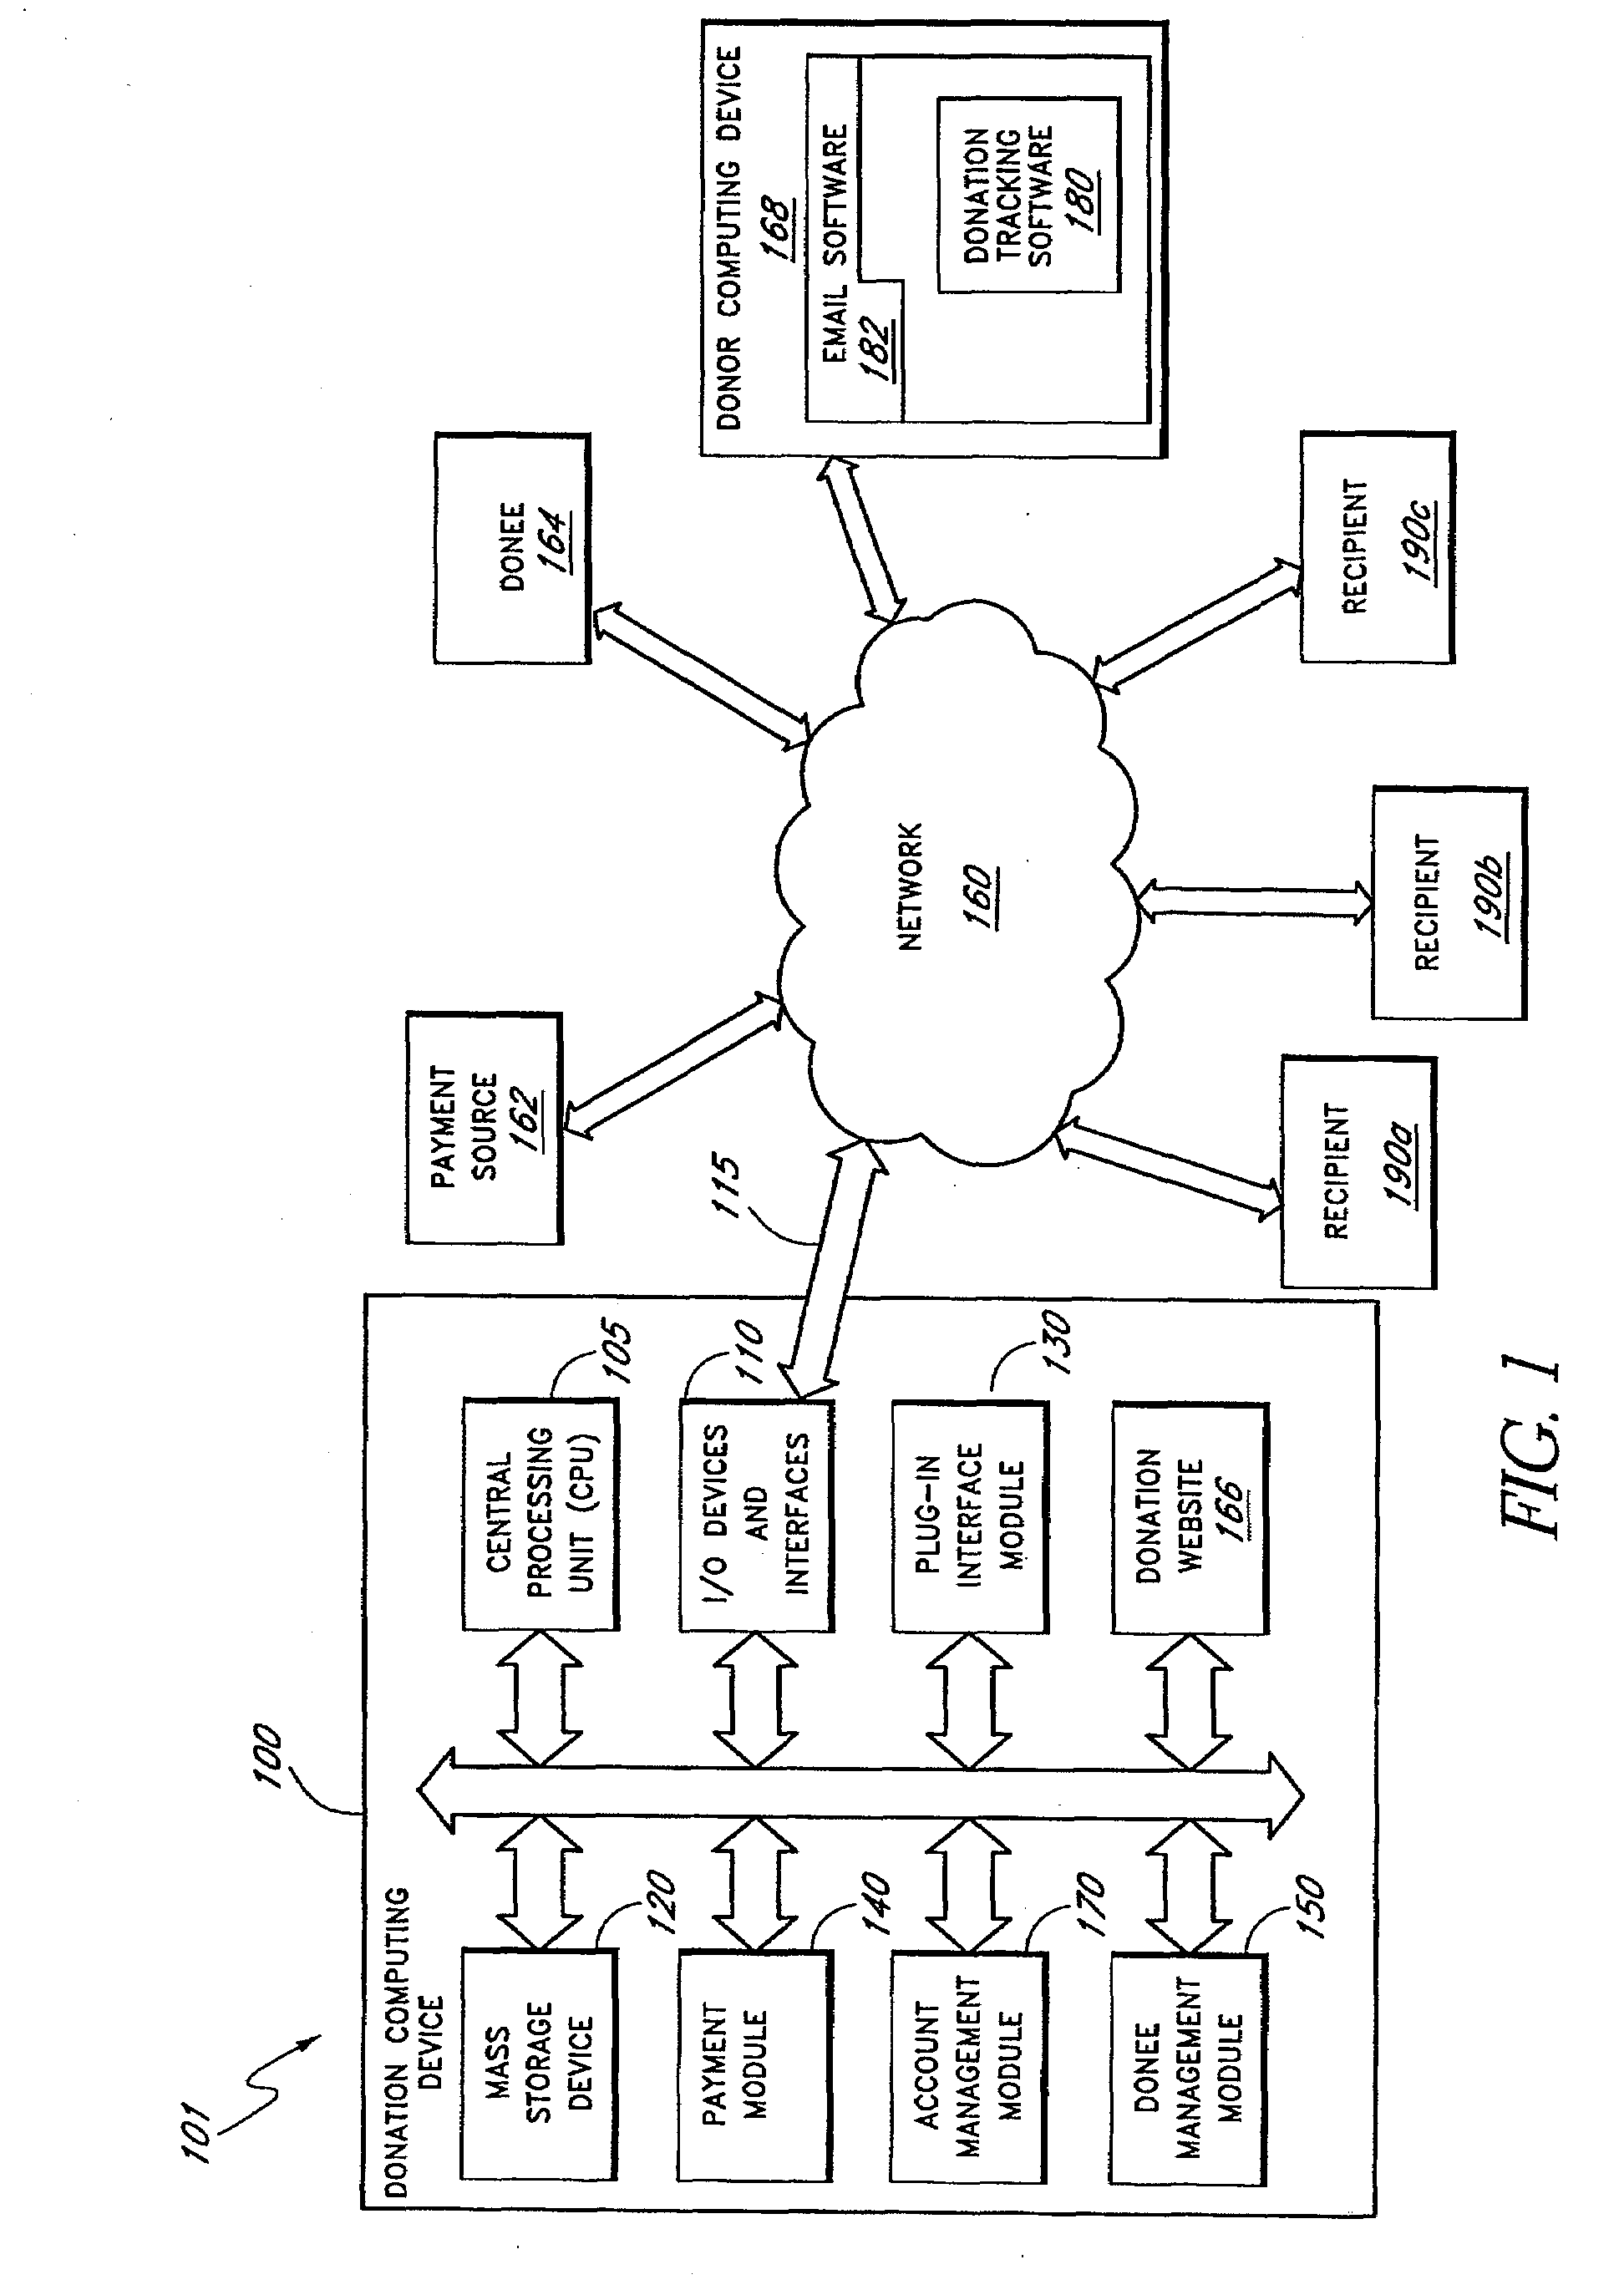 Systems and methods for providing electronic donation indications